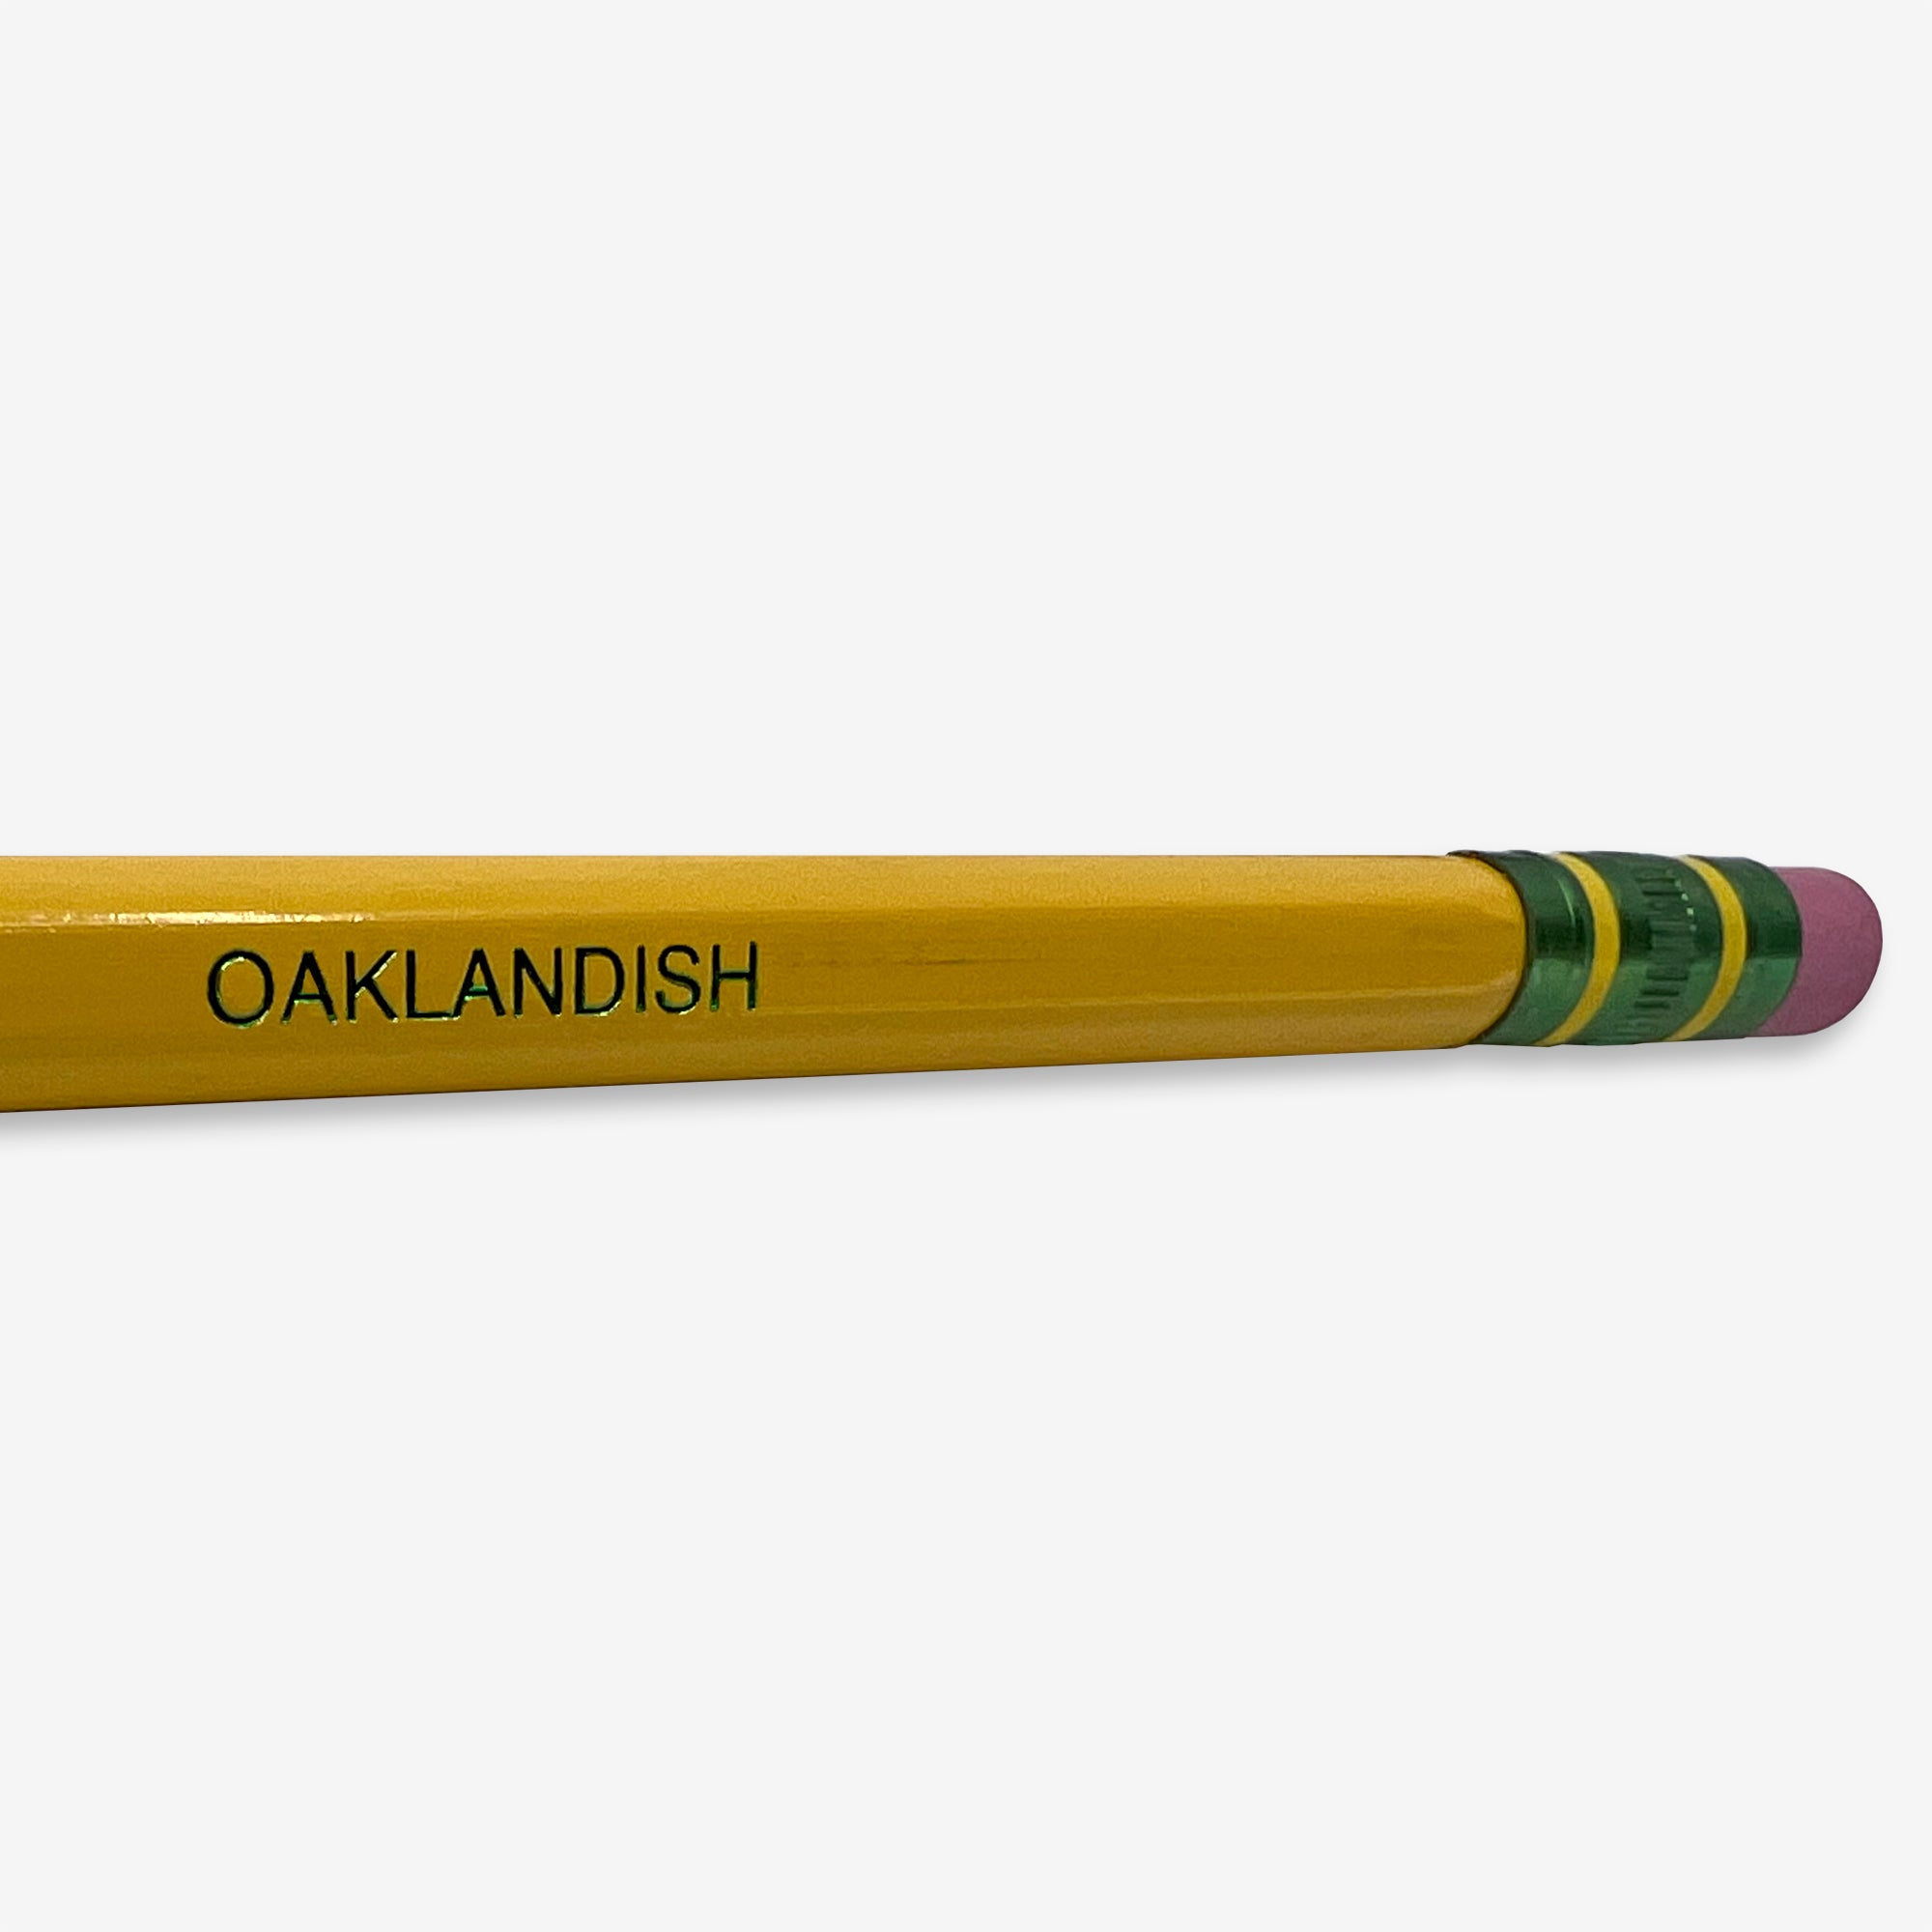 Close up of Oaklandish wordmark on the side of yellow Ticonderoga No. 2 hex pencil with three green stripes under the pink eraser.